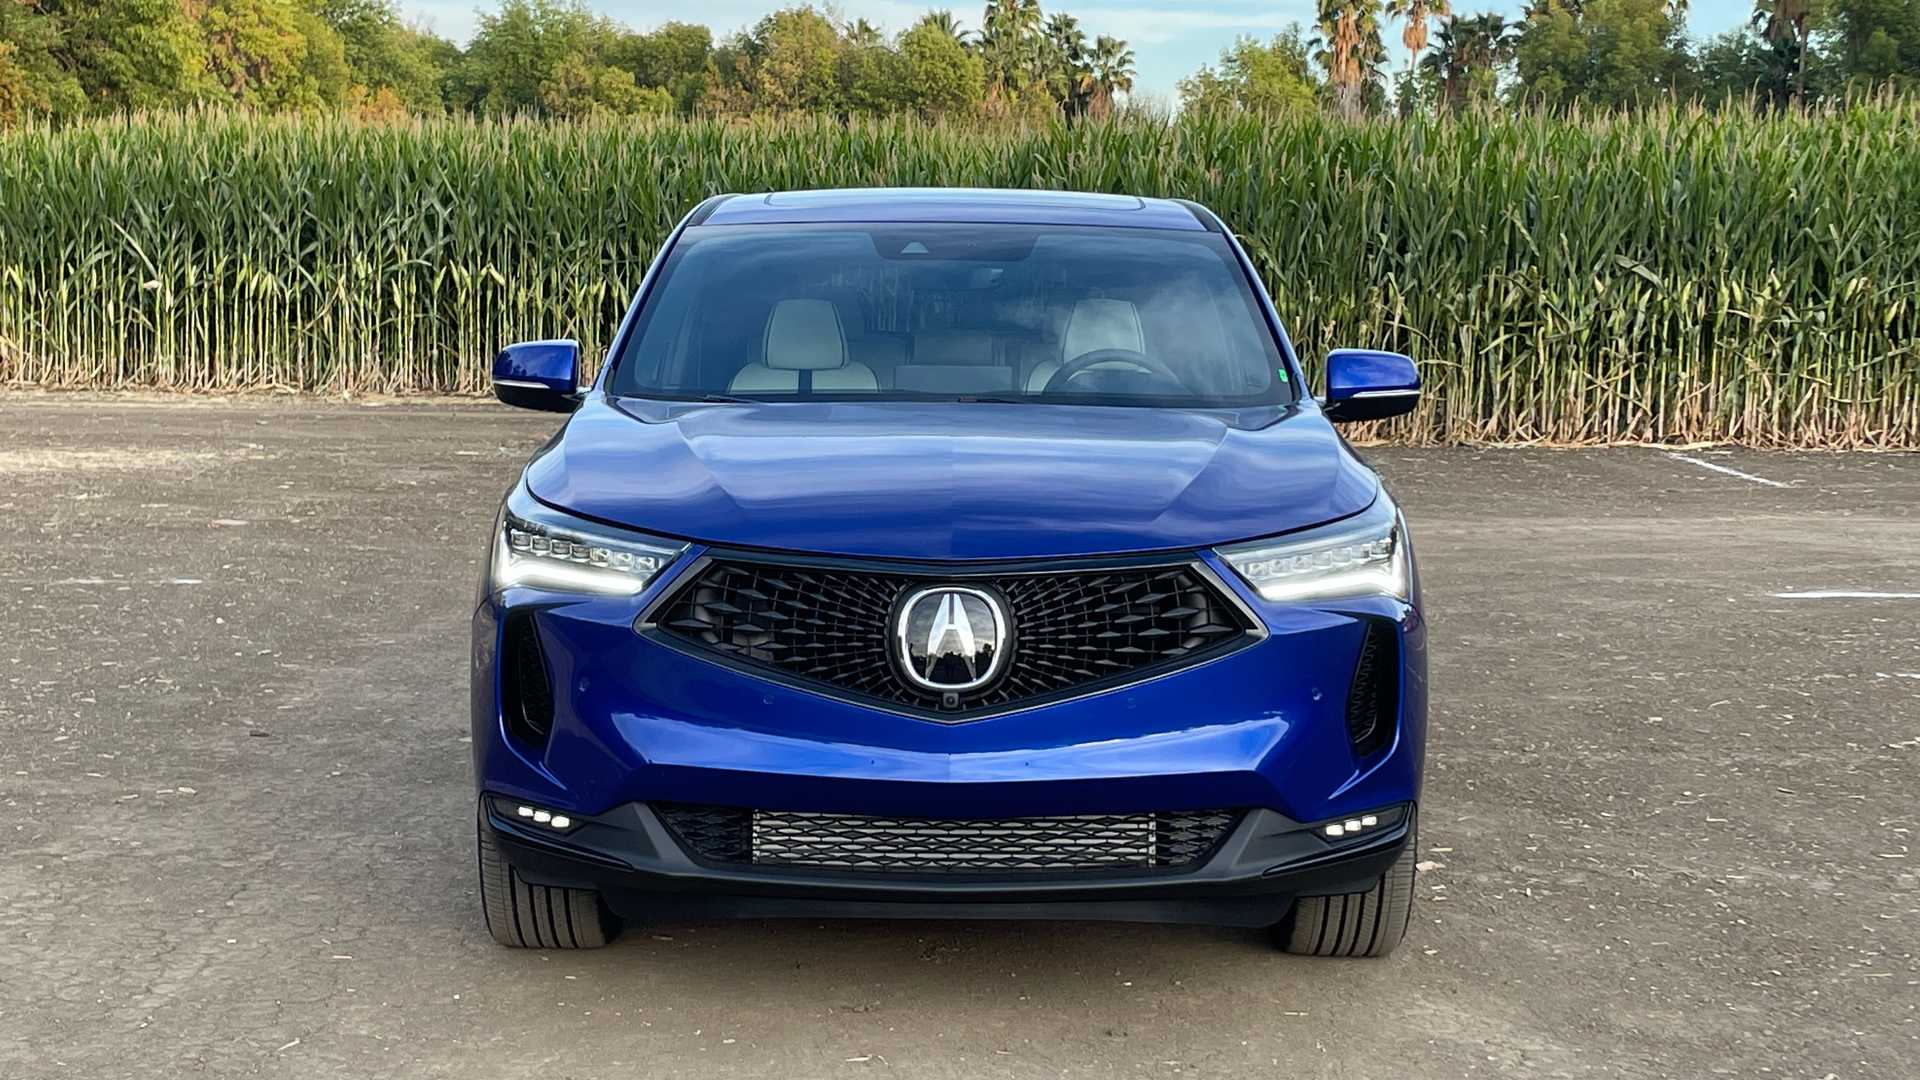 2022-acura-rdx-a-spec-advance-exterior-front-view.jpg